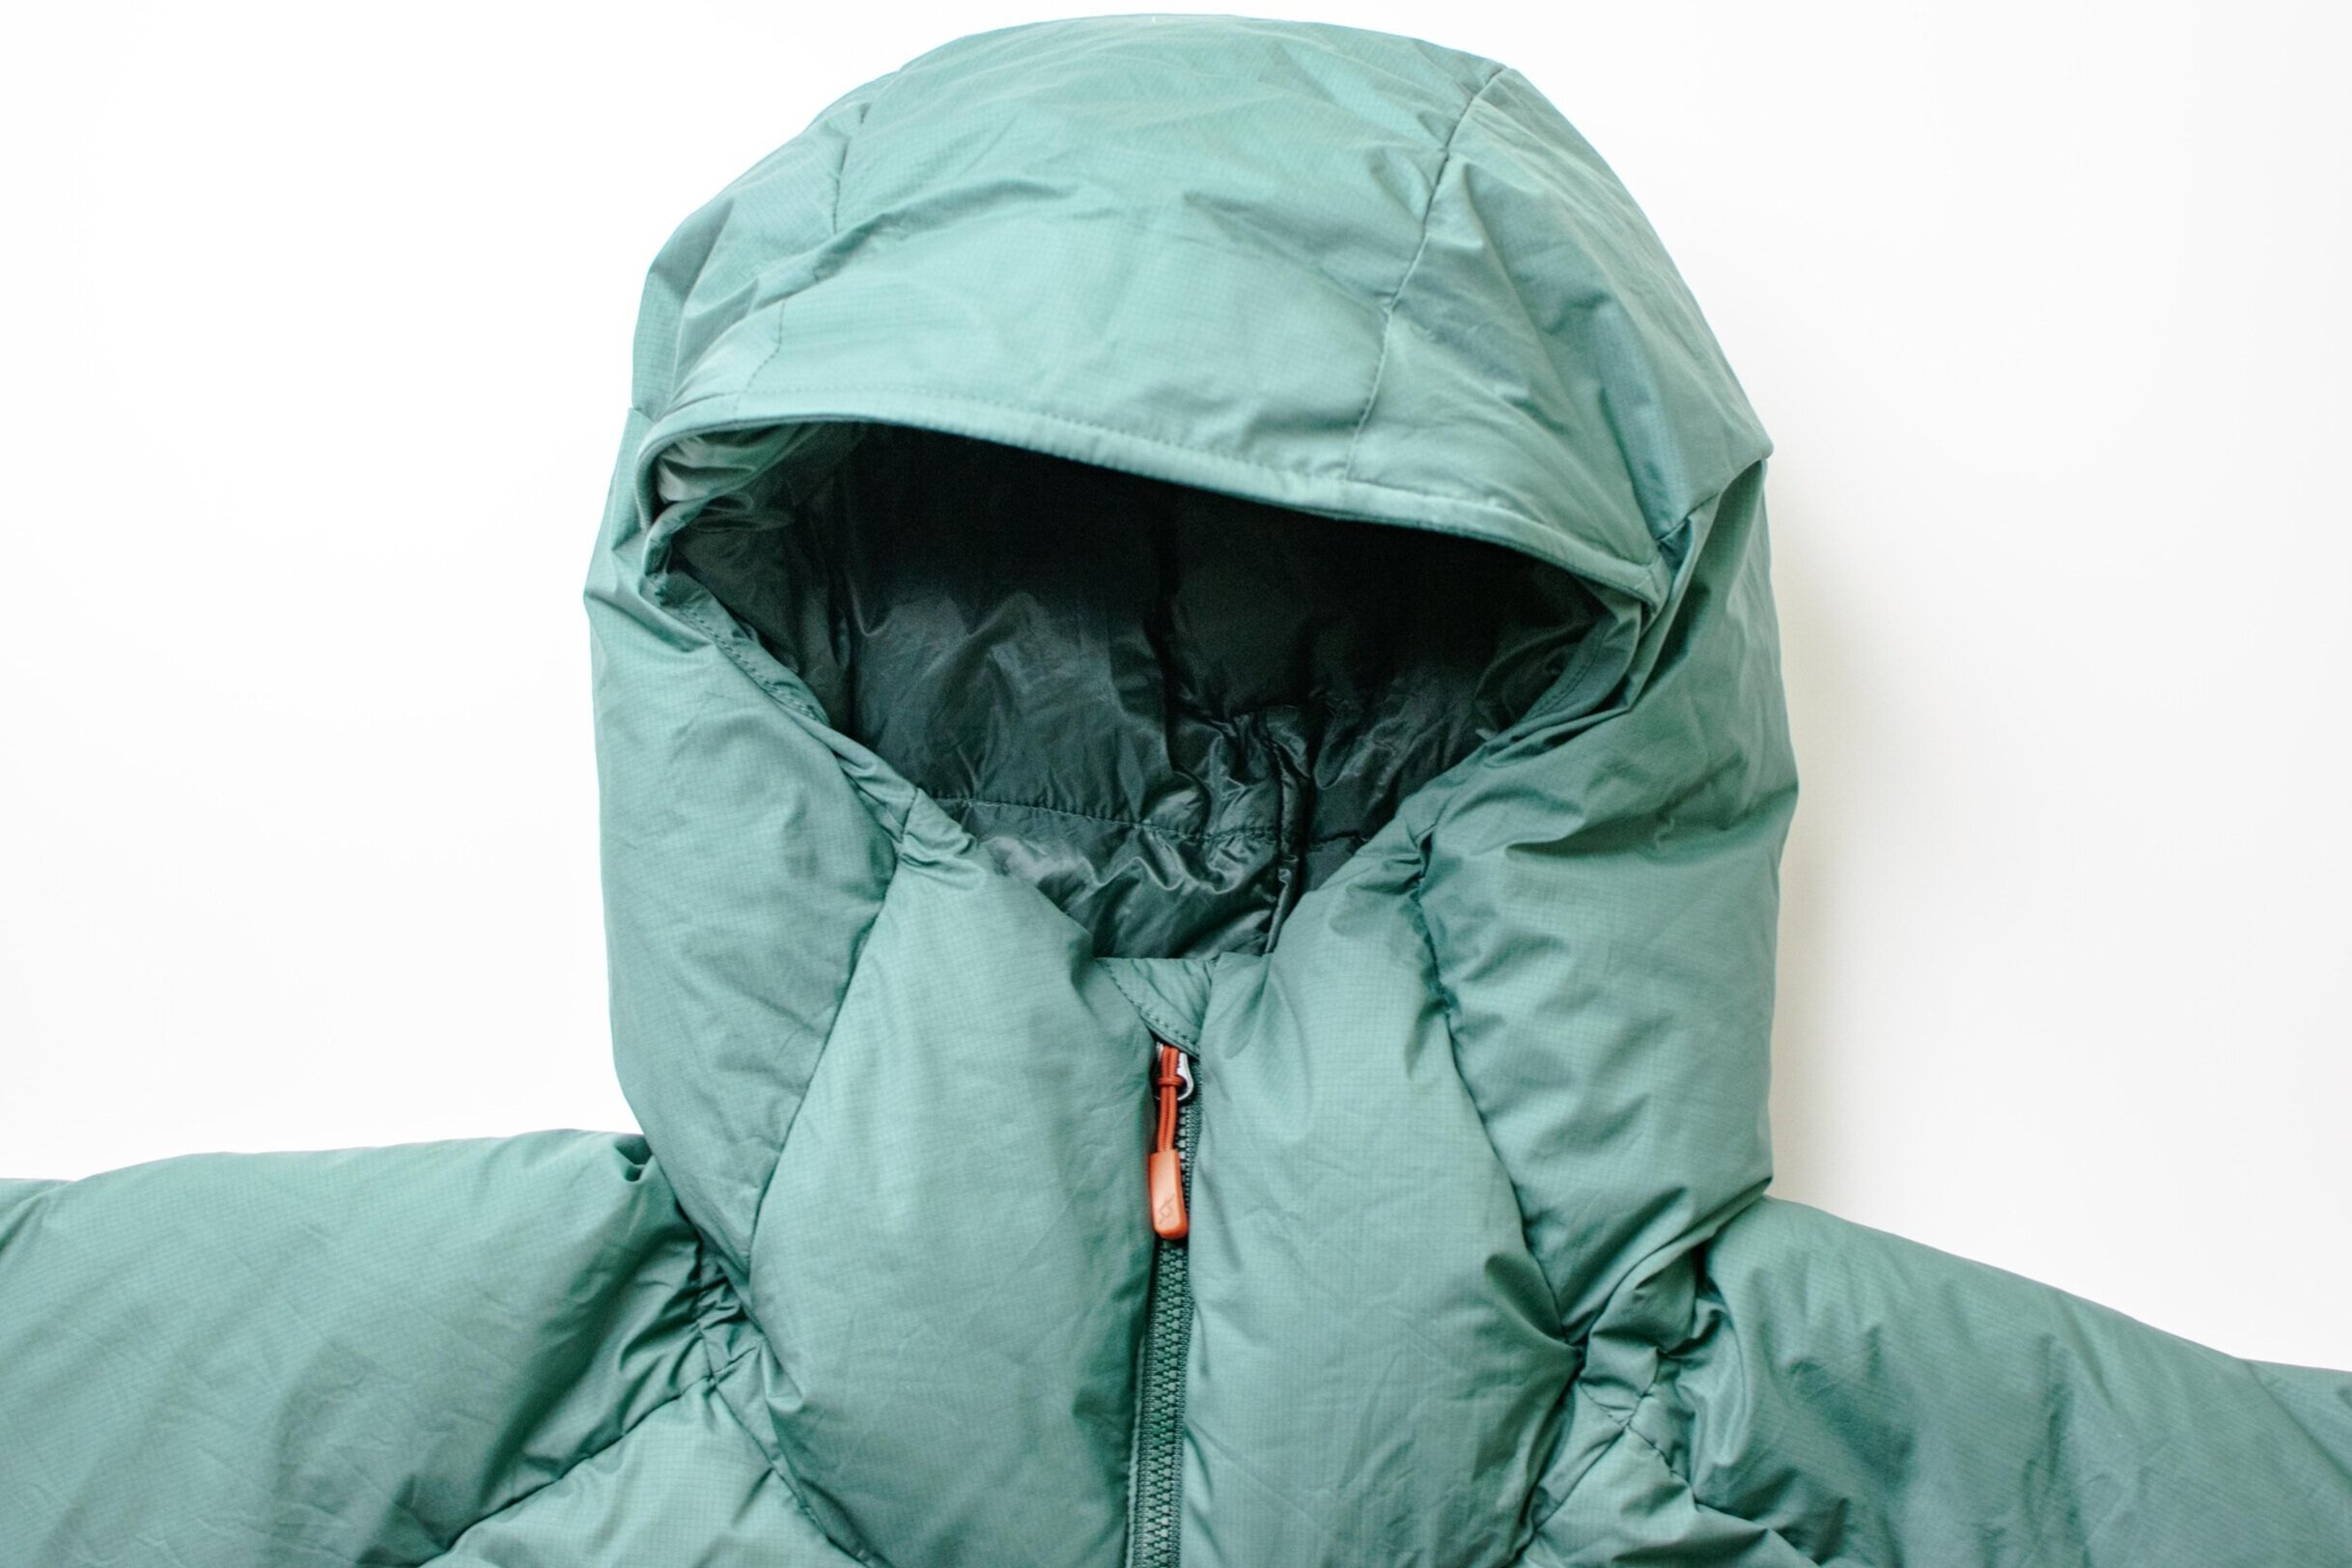 sand Hellere Permanent Review: Rab Infinity Light Down Jacket (2020) — Coatchecking